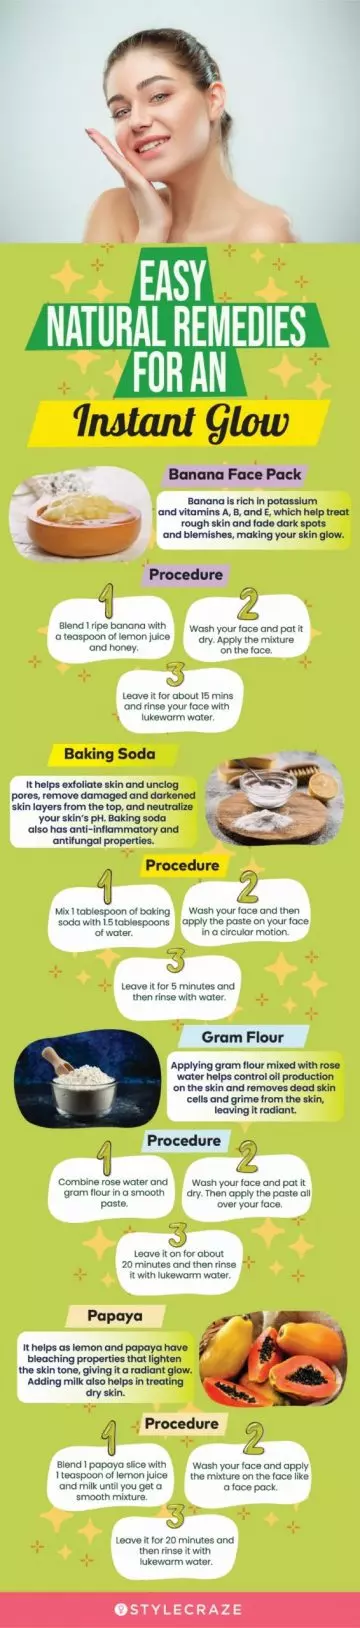 easy natural remedes for an instant glow (infographic) (infographic)